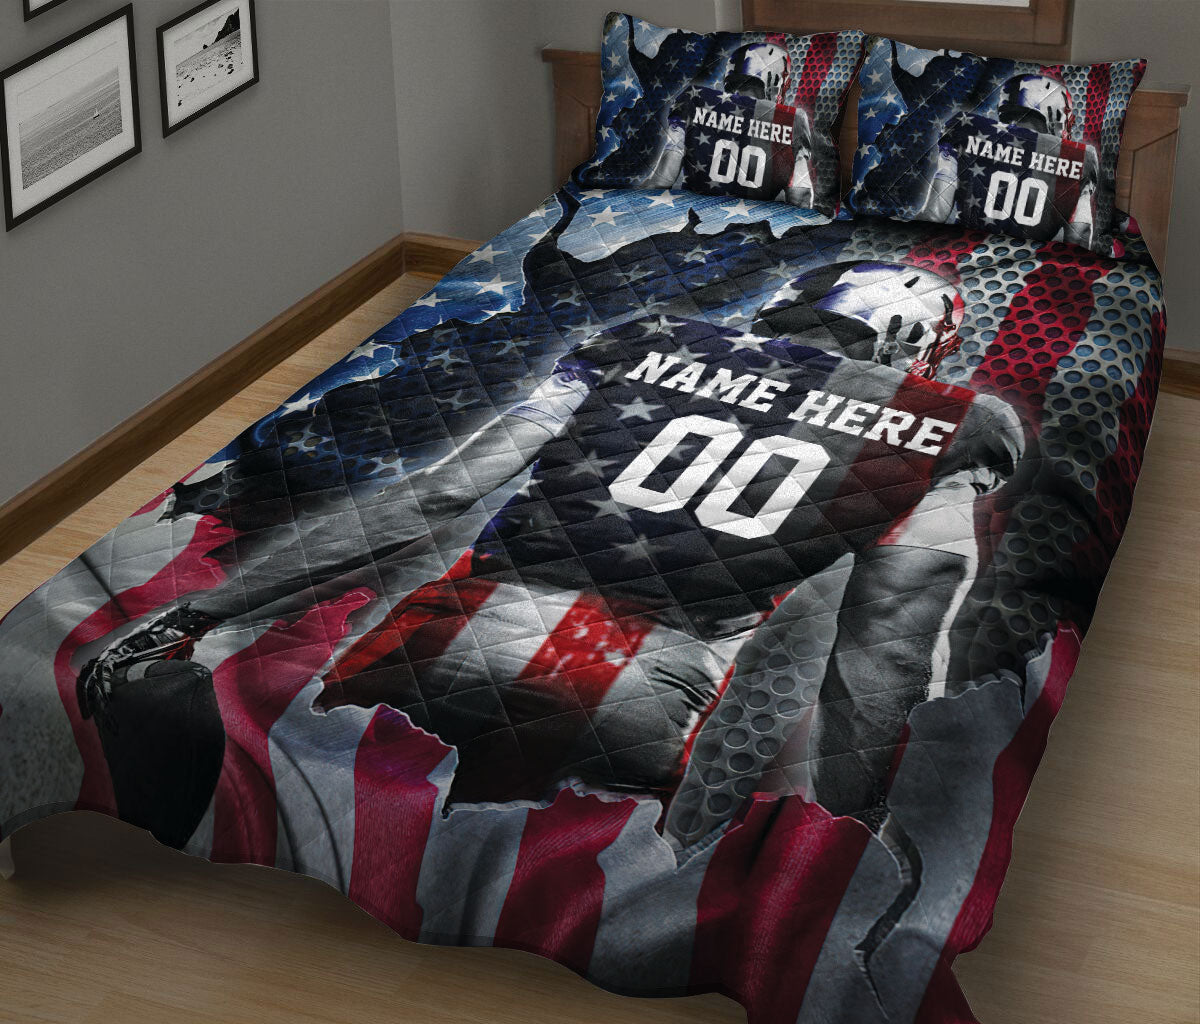 Ohaprints-Quilt-Bed-Set-Pillowcase-American-Football-Player-American-Flag-Pattern-Custom-Personalized-Name-Number-Blanket-Bedspread-Bedding-2961-King (90'' x 100'')